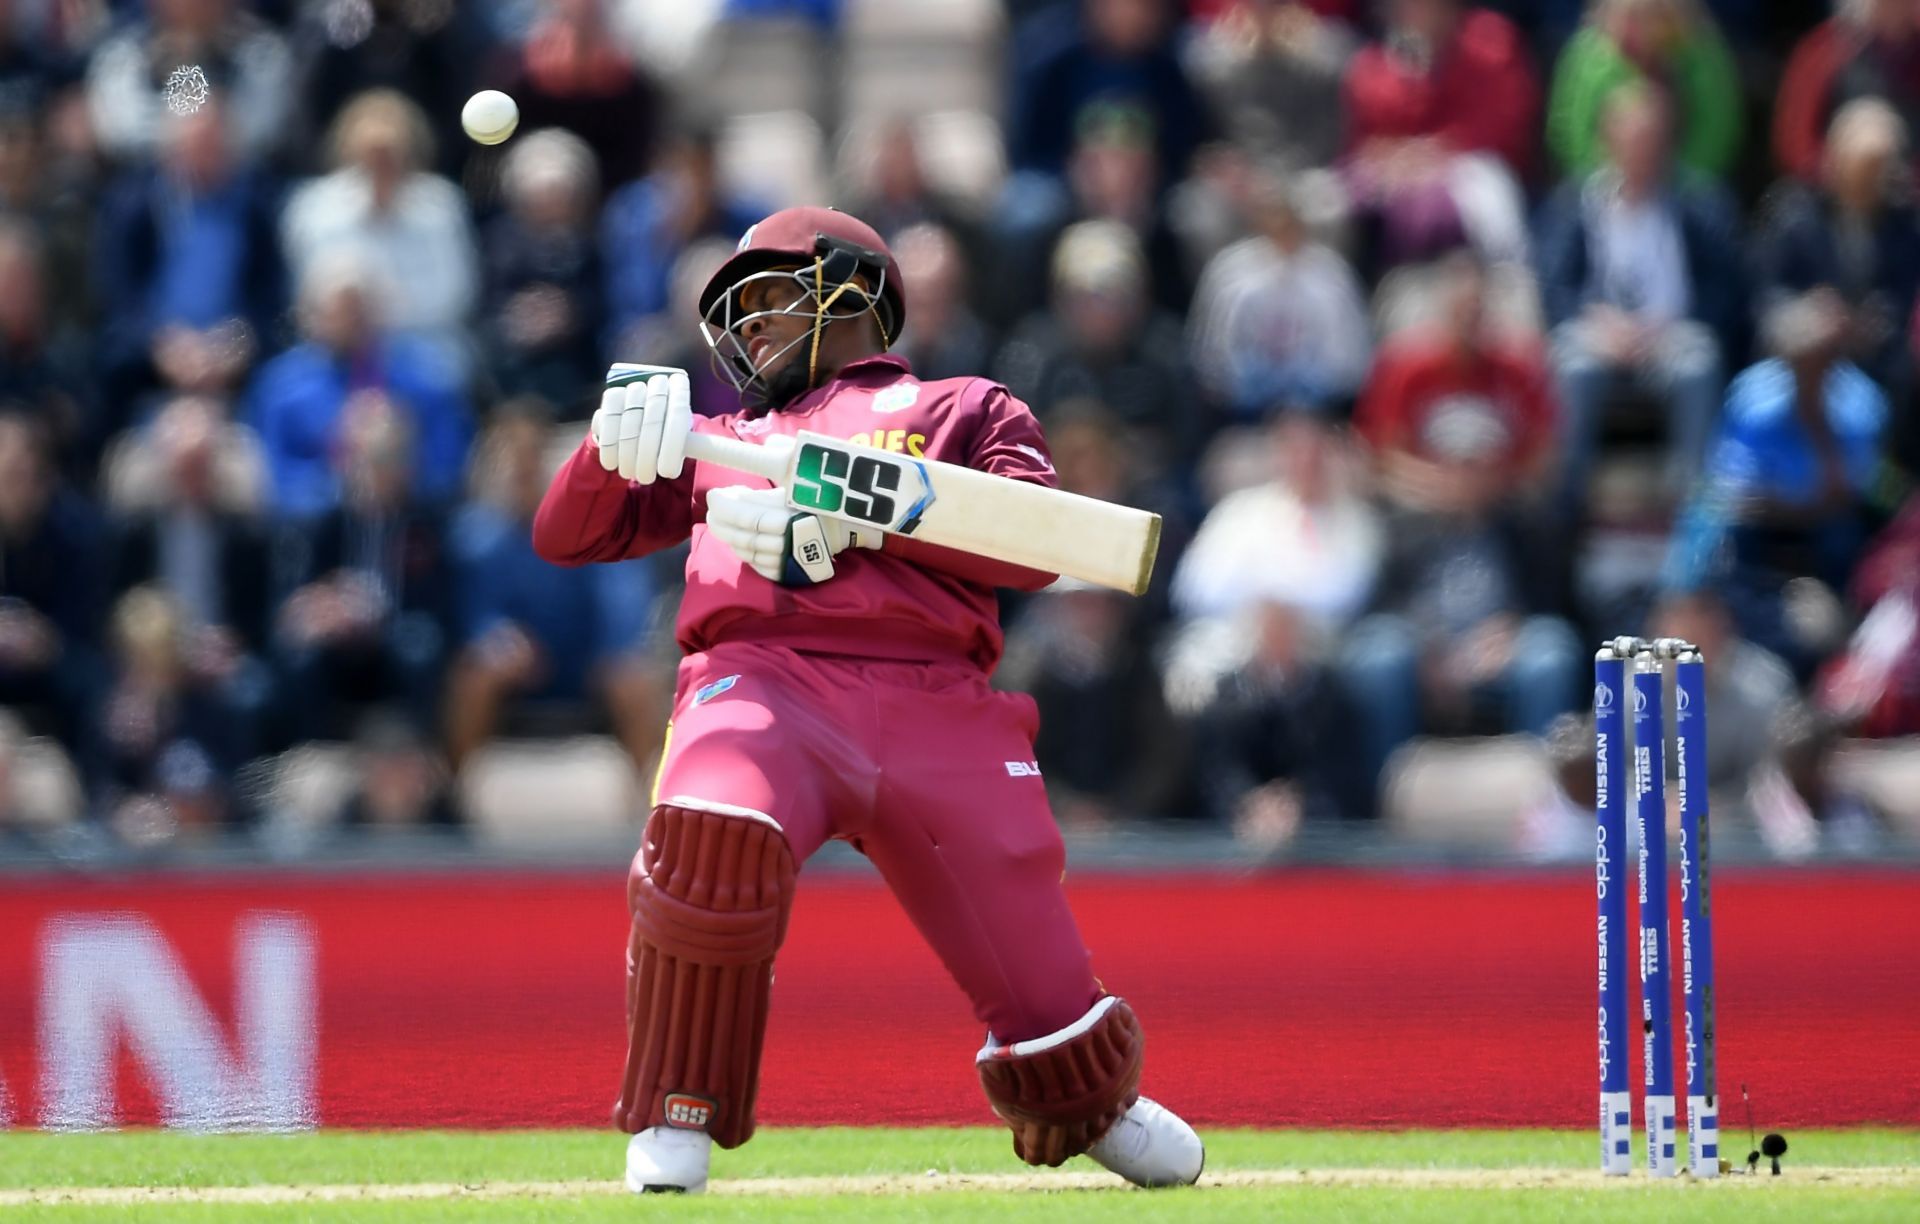 West Indies will be a force to reckon with in the T20 World Cup